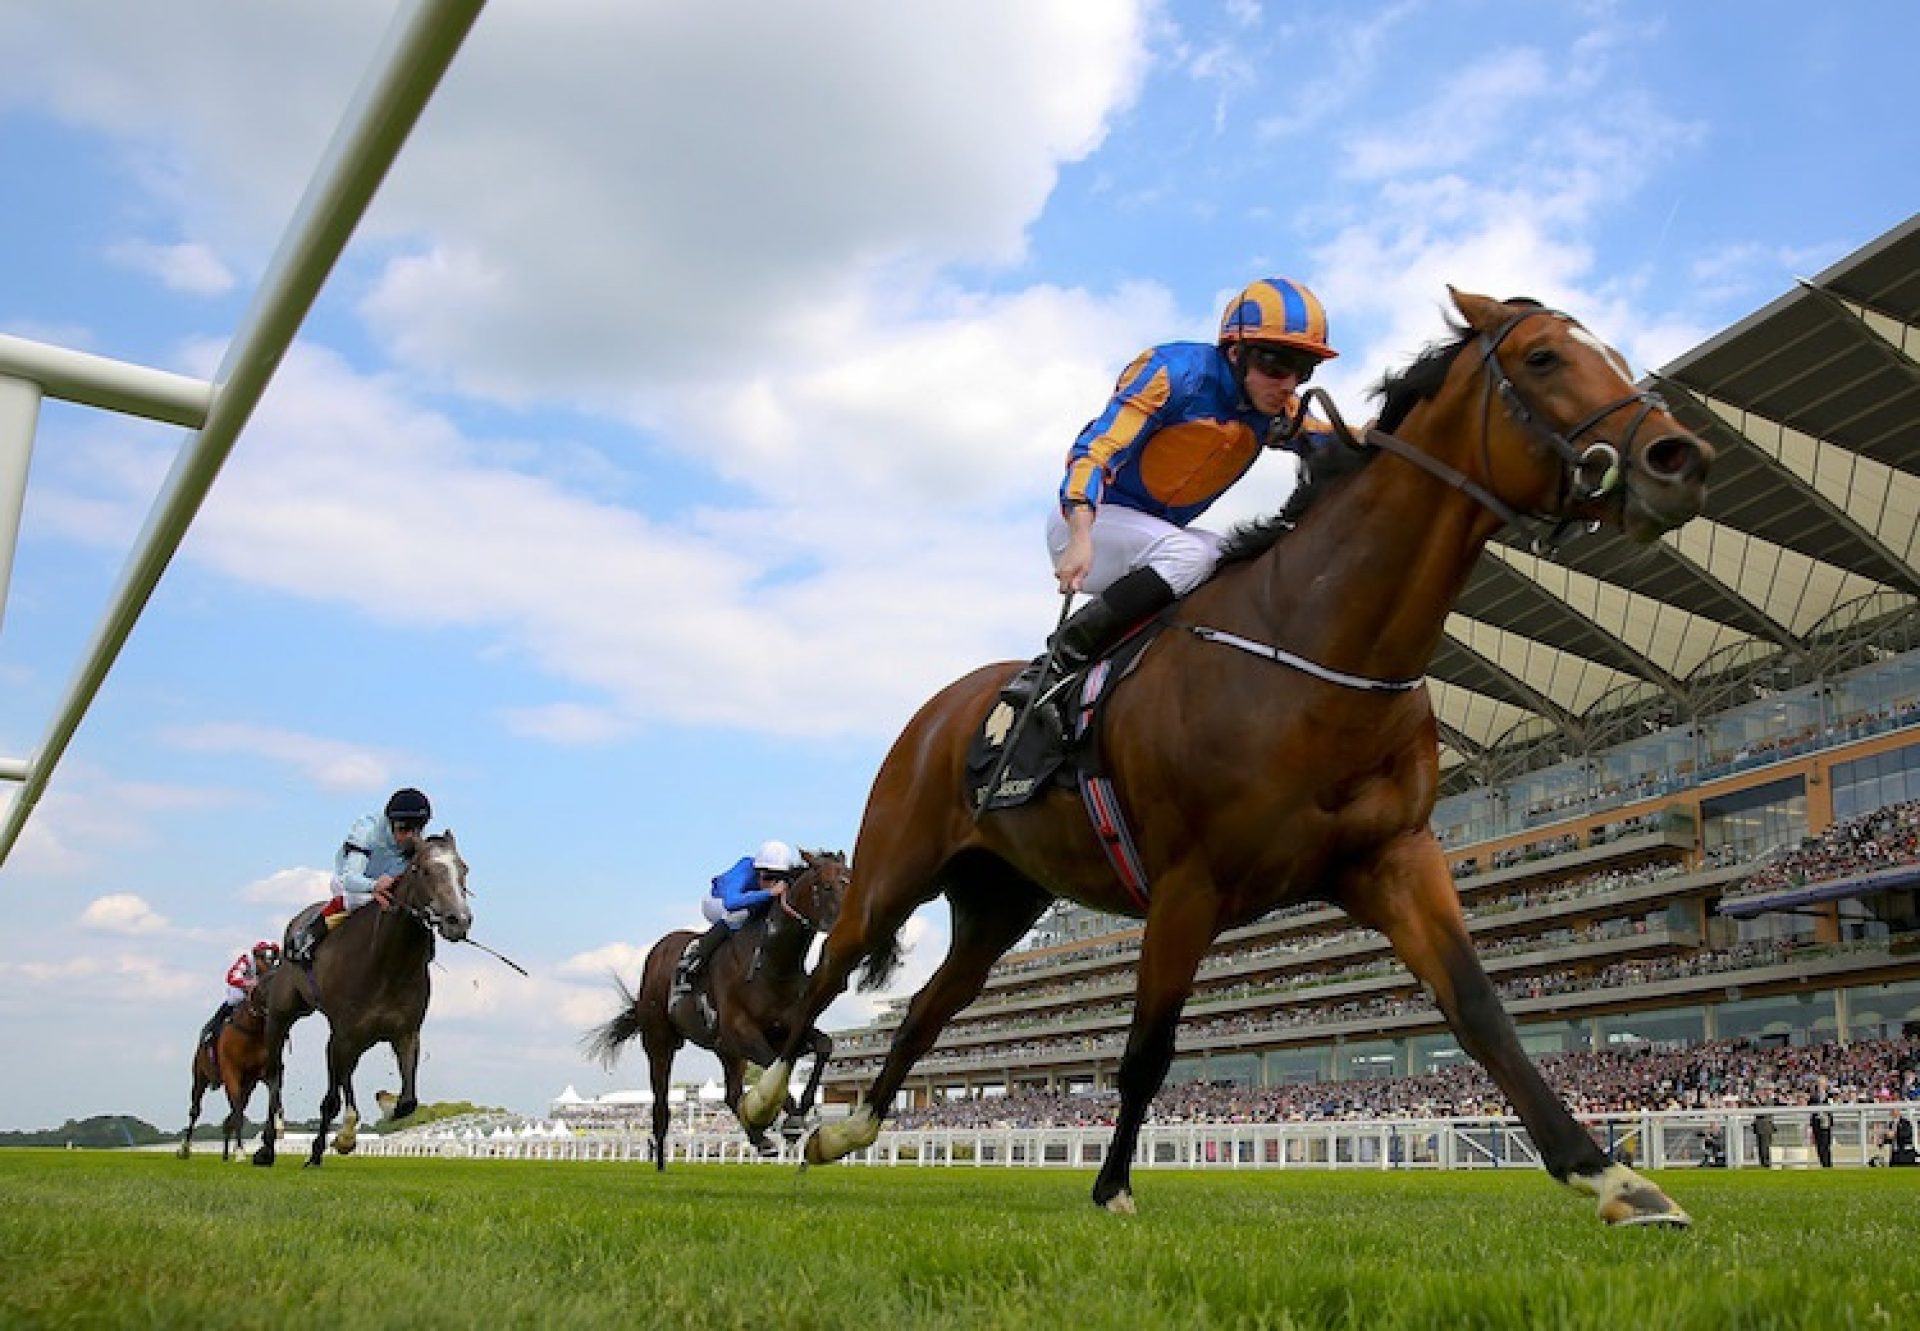 Gleneagles (Galileo) winning the G1 St James's Palace Stakes at Royal Ascot